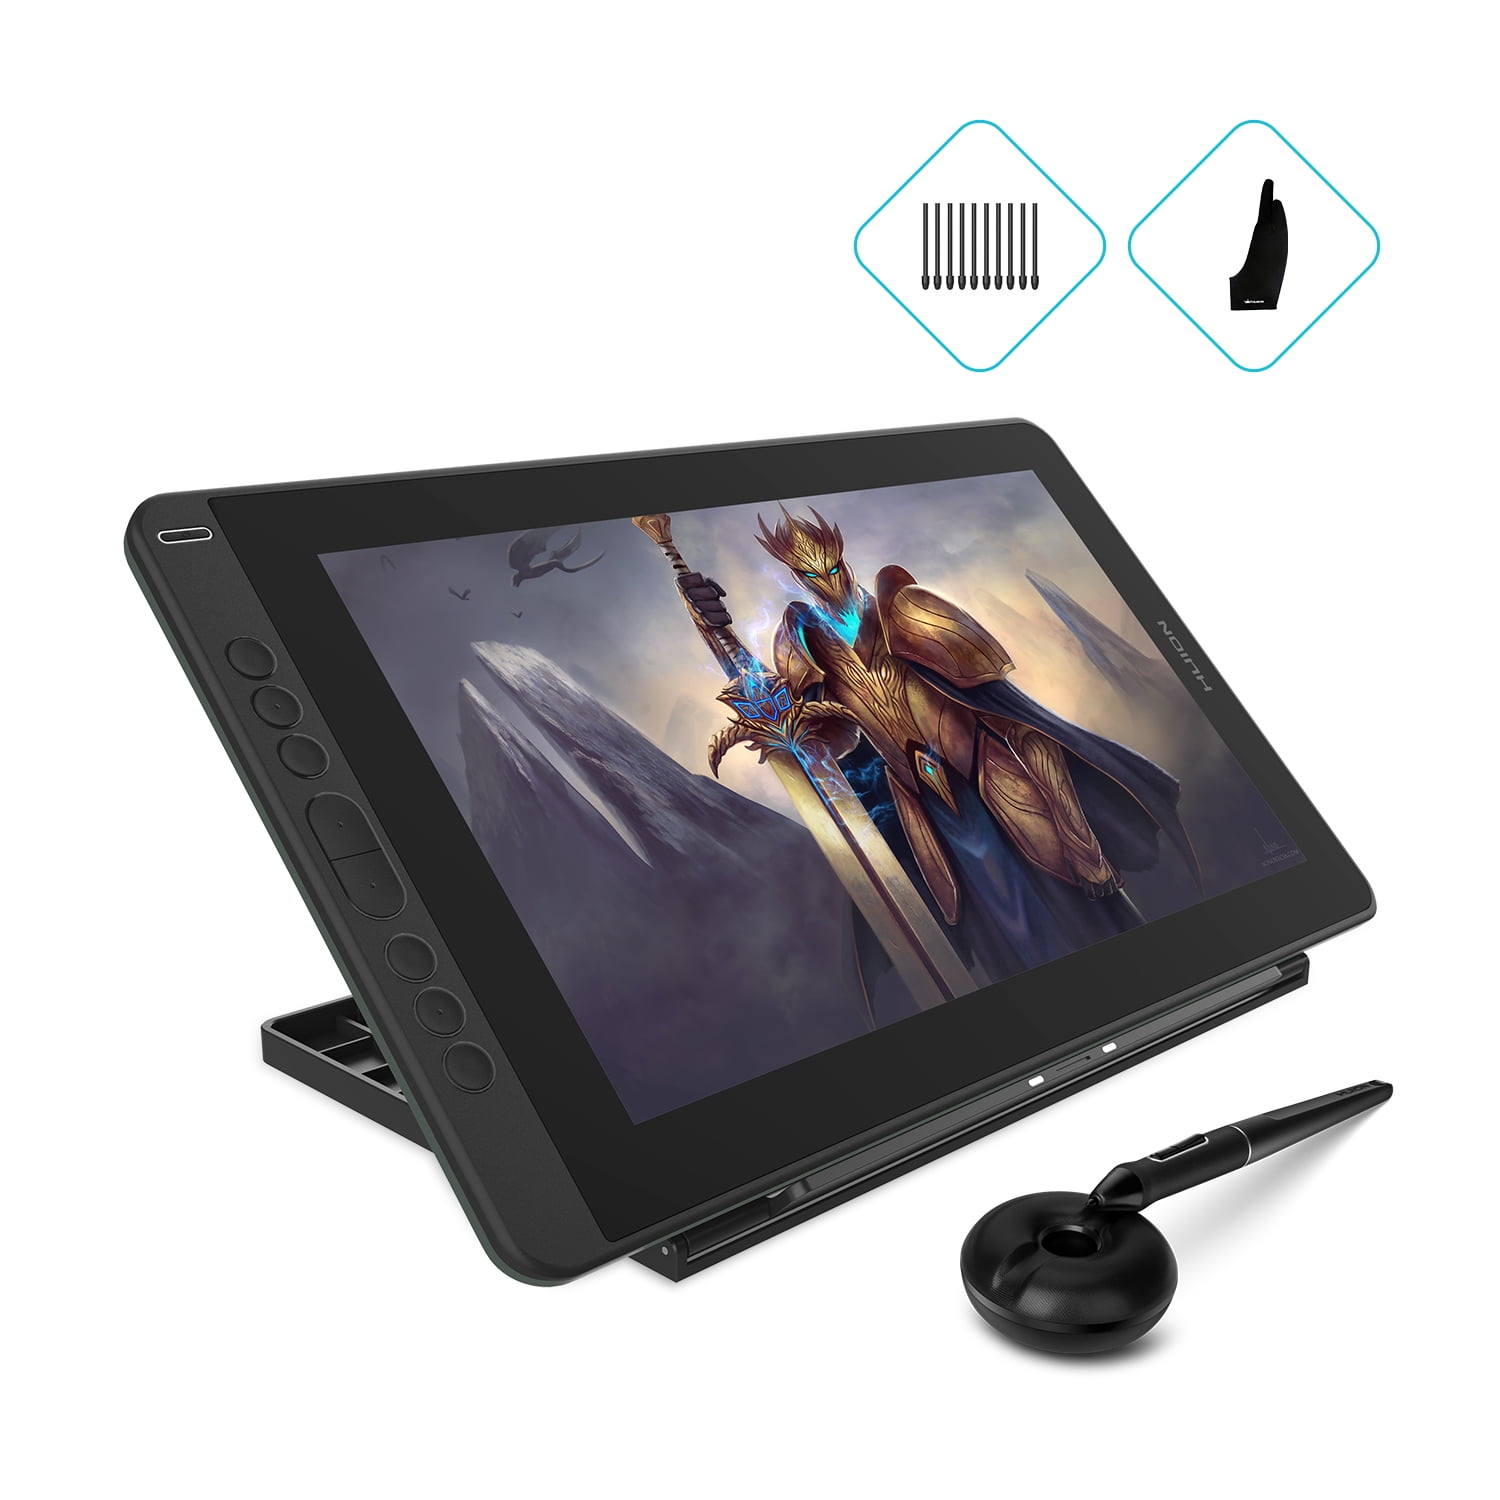 Affordable Standalone Drawing Tablets